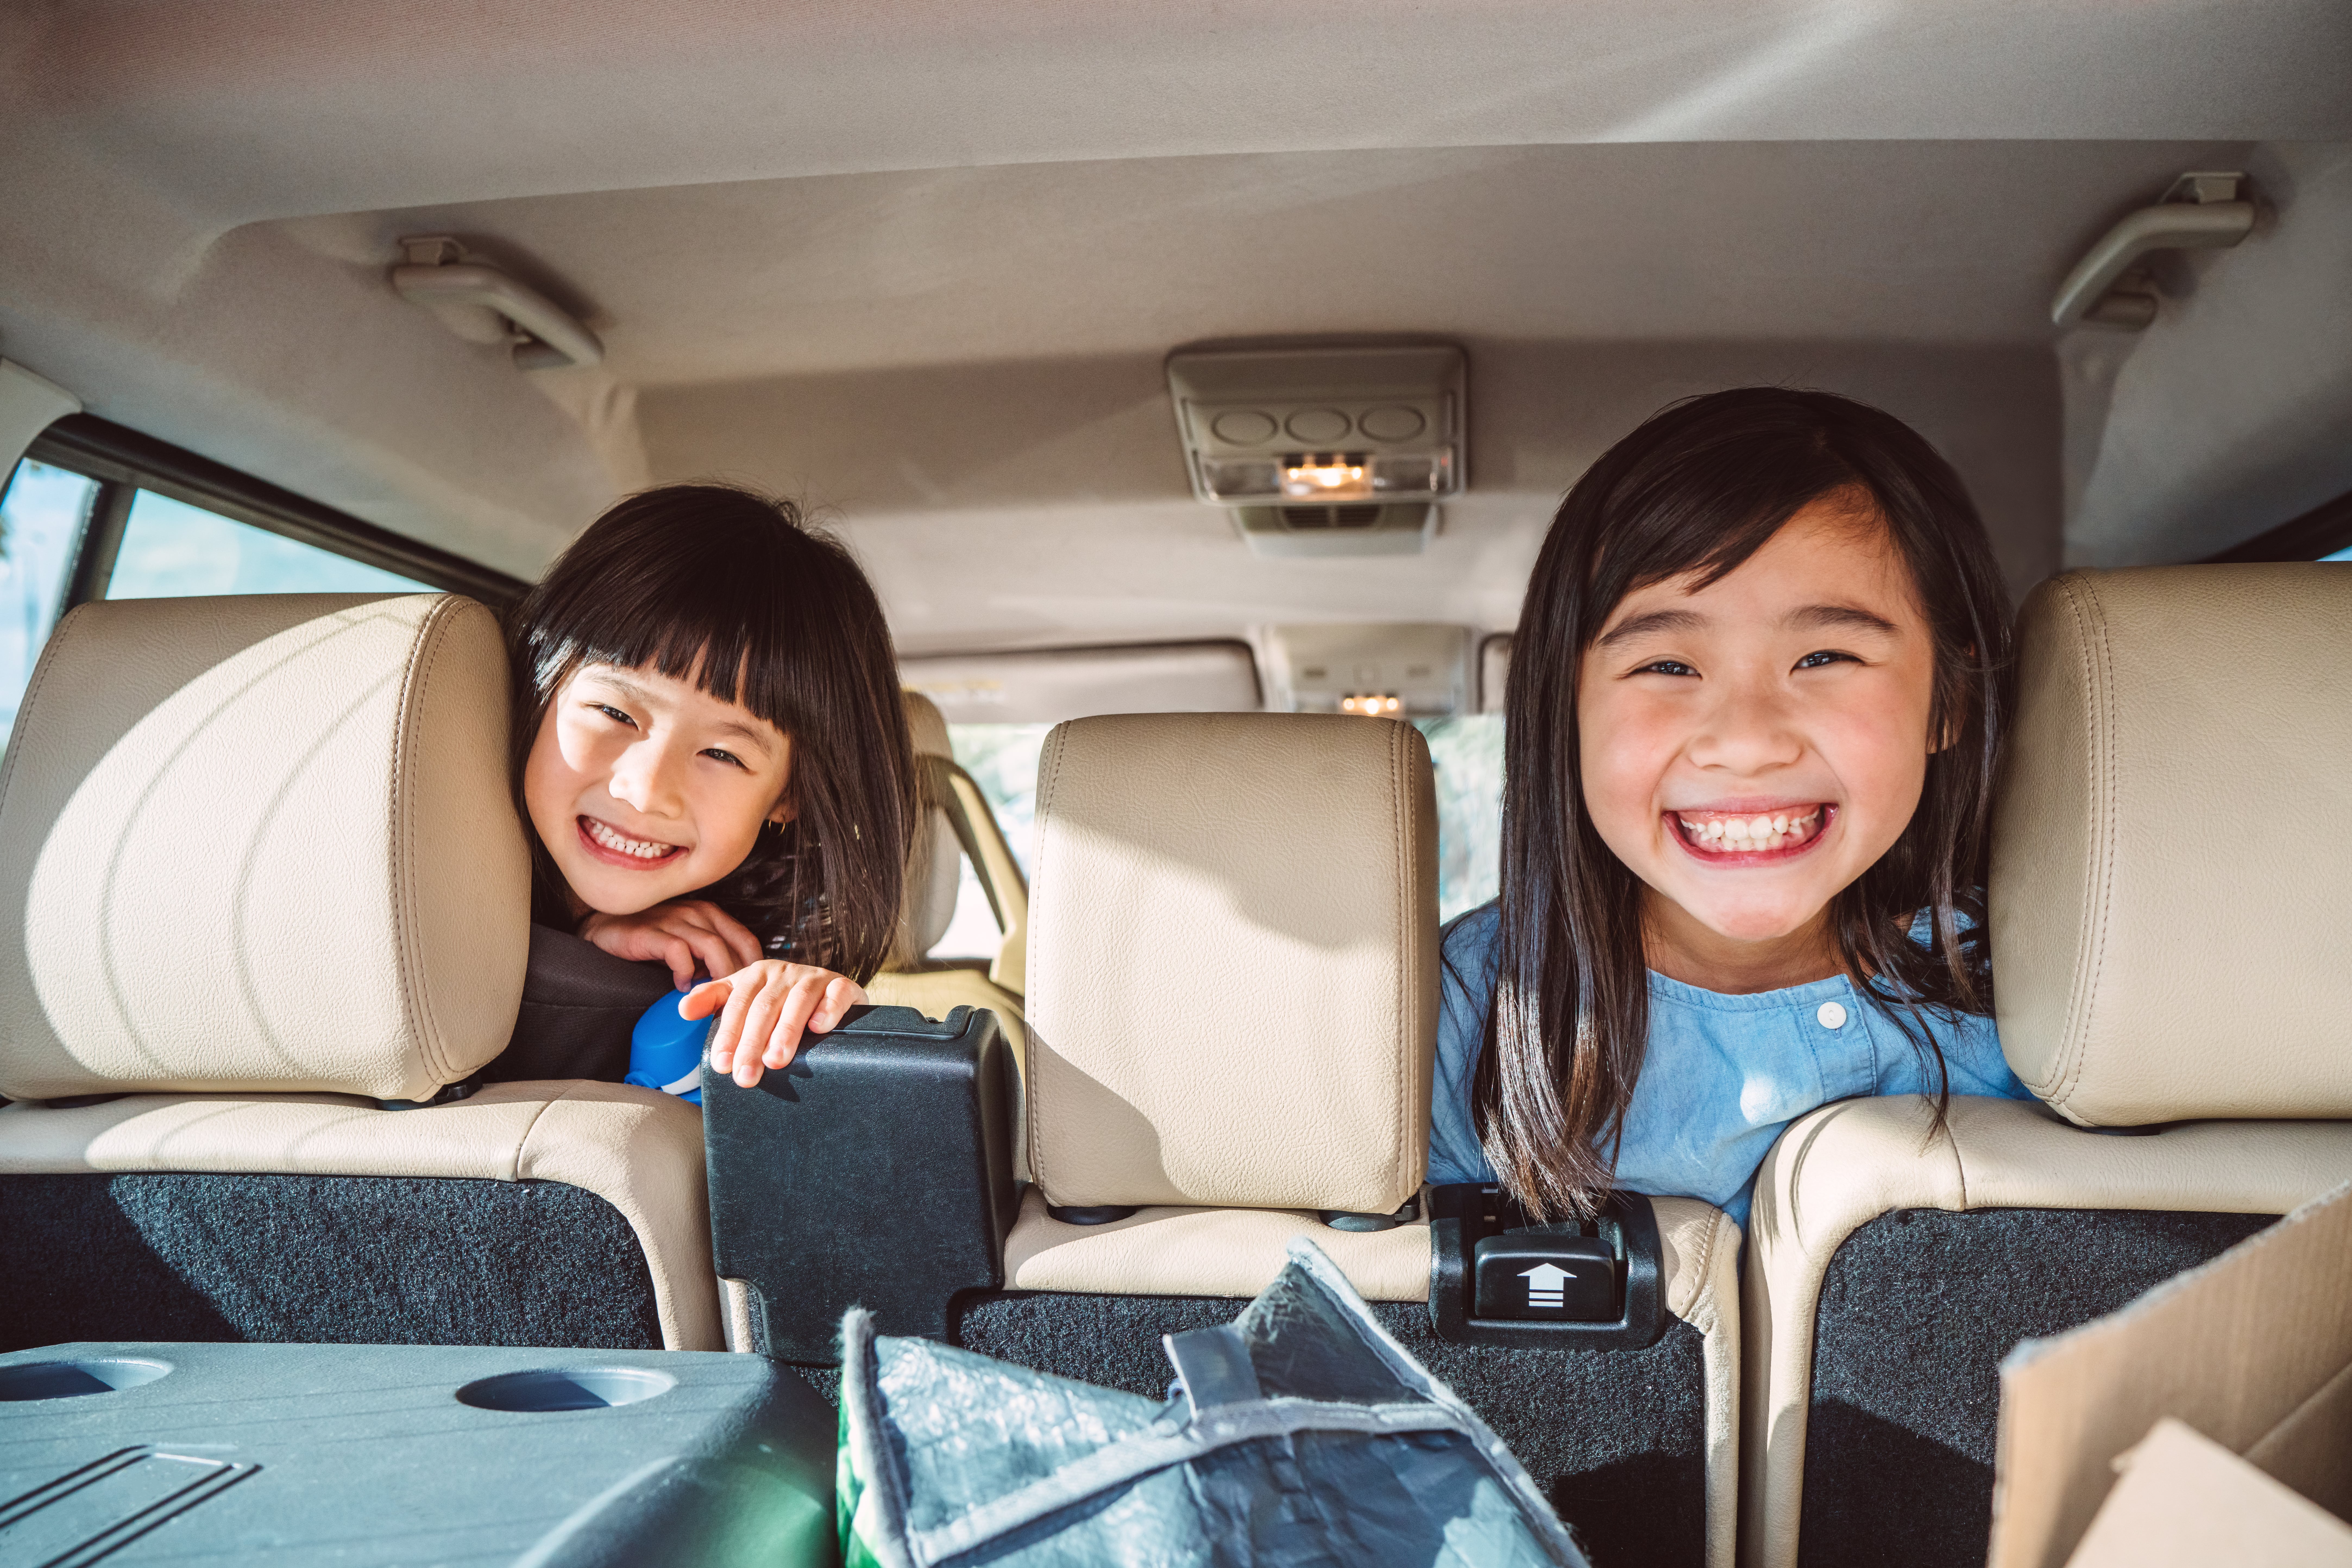 21 easy children's Car Games & Road trip activities for kids (Survive your  family road trip!)